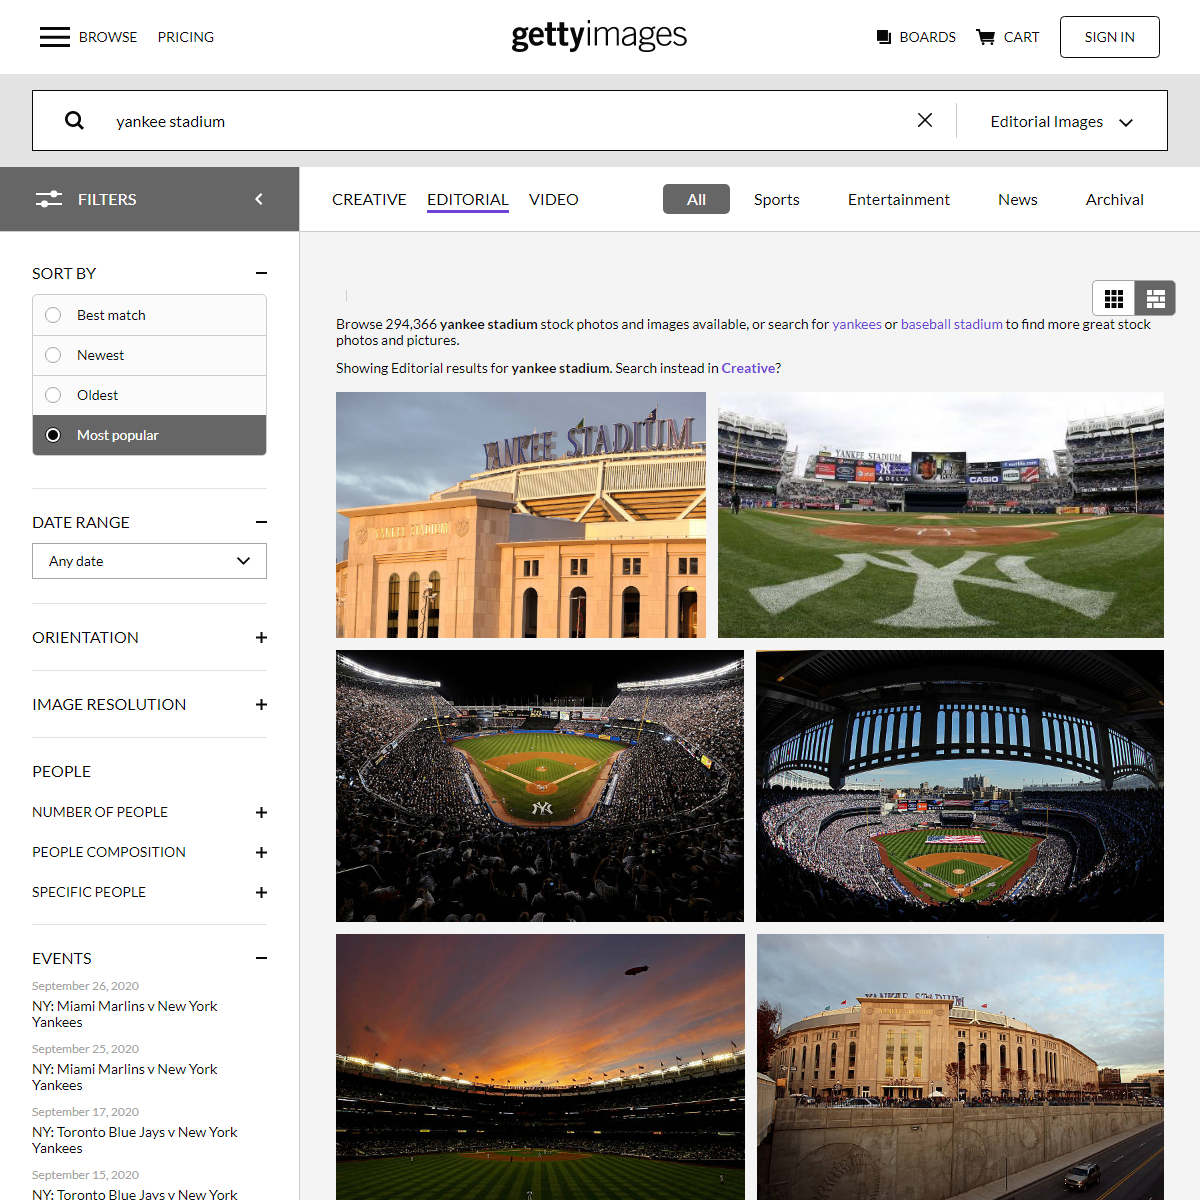 A complete backup of https://www.gettyimages.com/photos/yankee-stadium